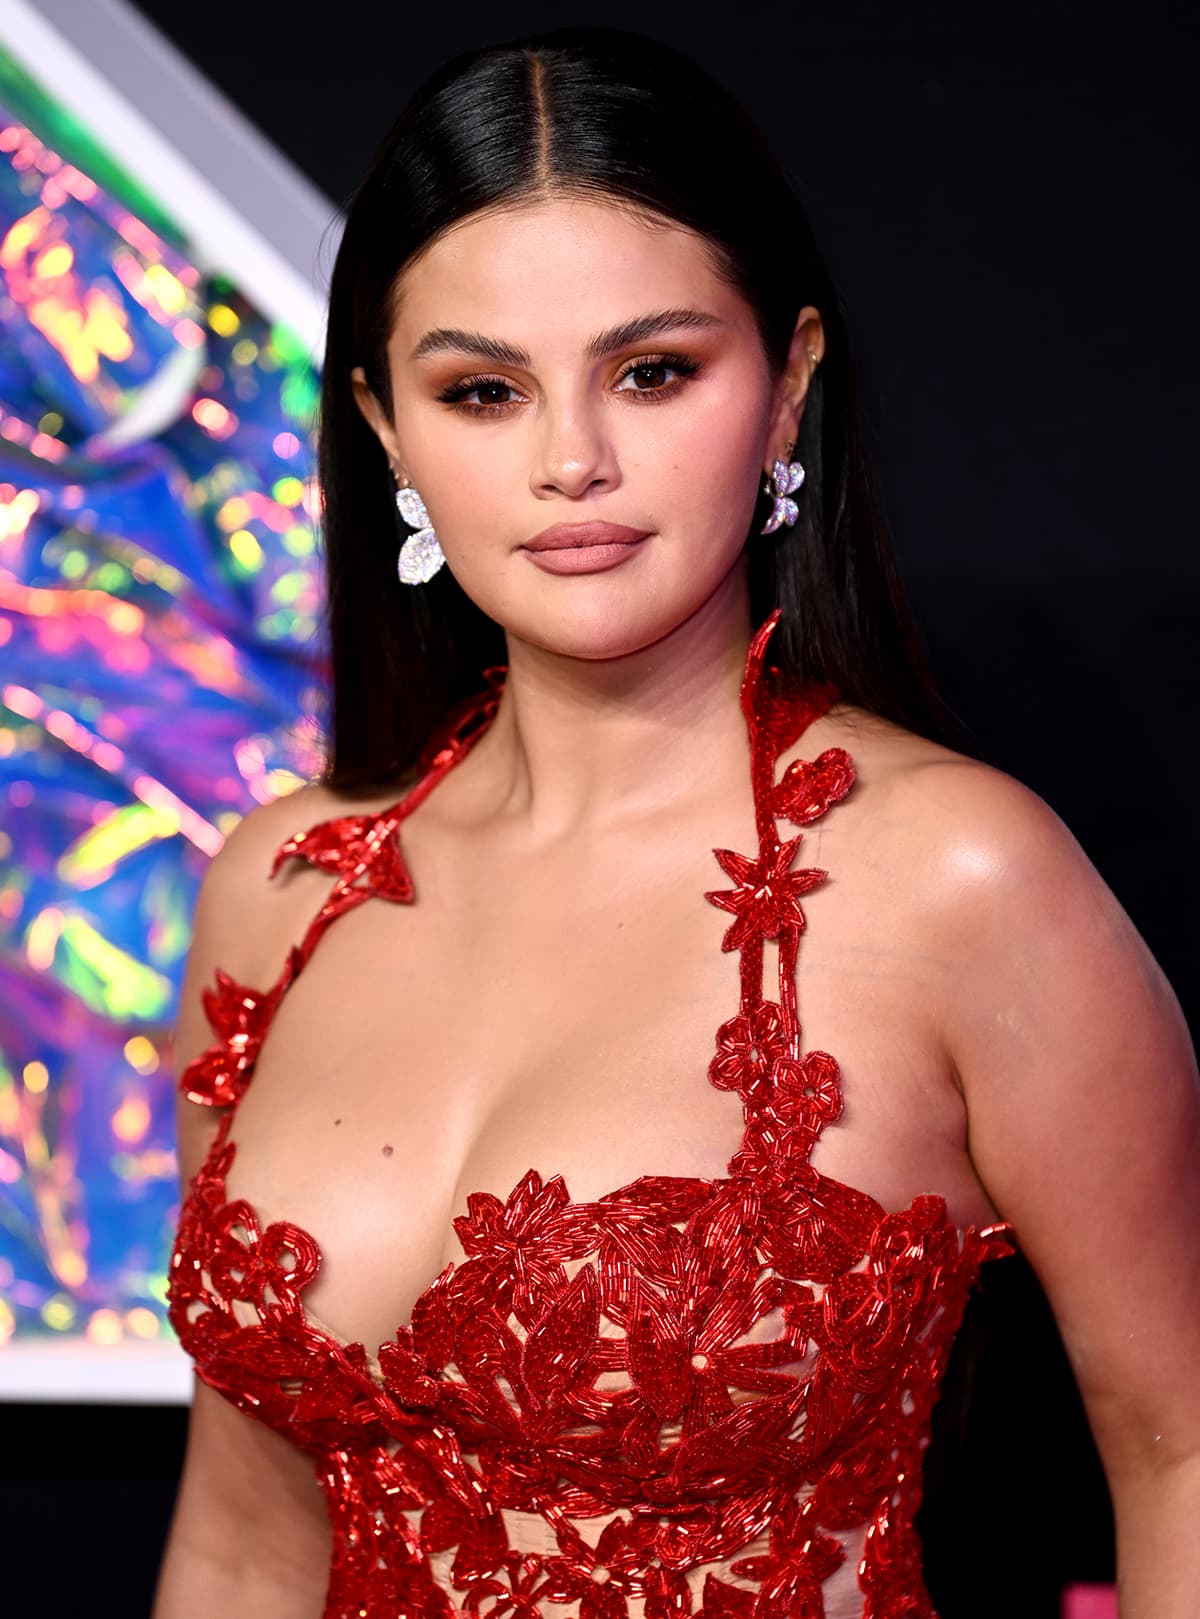 Selena Gomez wears neutral makeup with bronze eyeshadow and nude lipstick and styles her tresses straight and tucked behind her ears